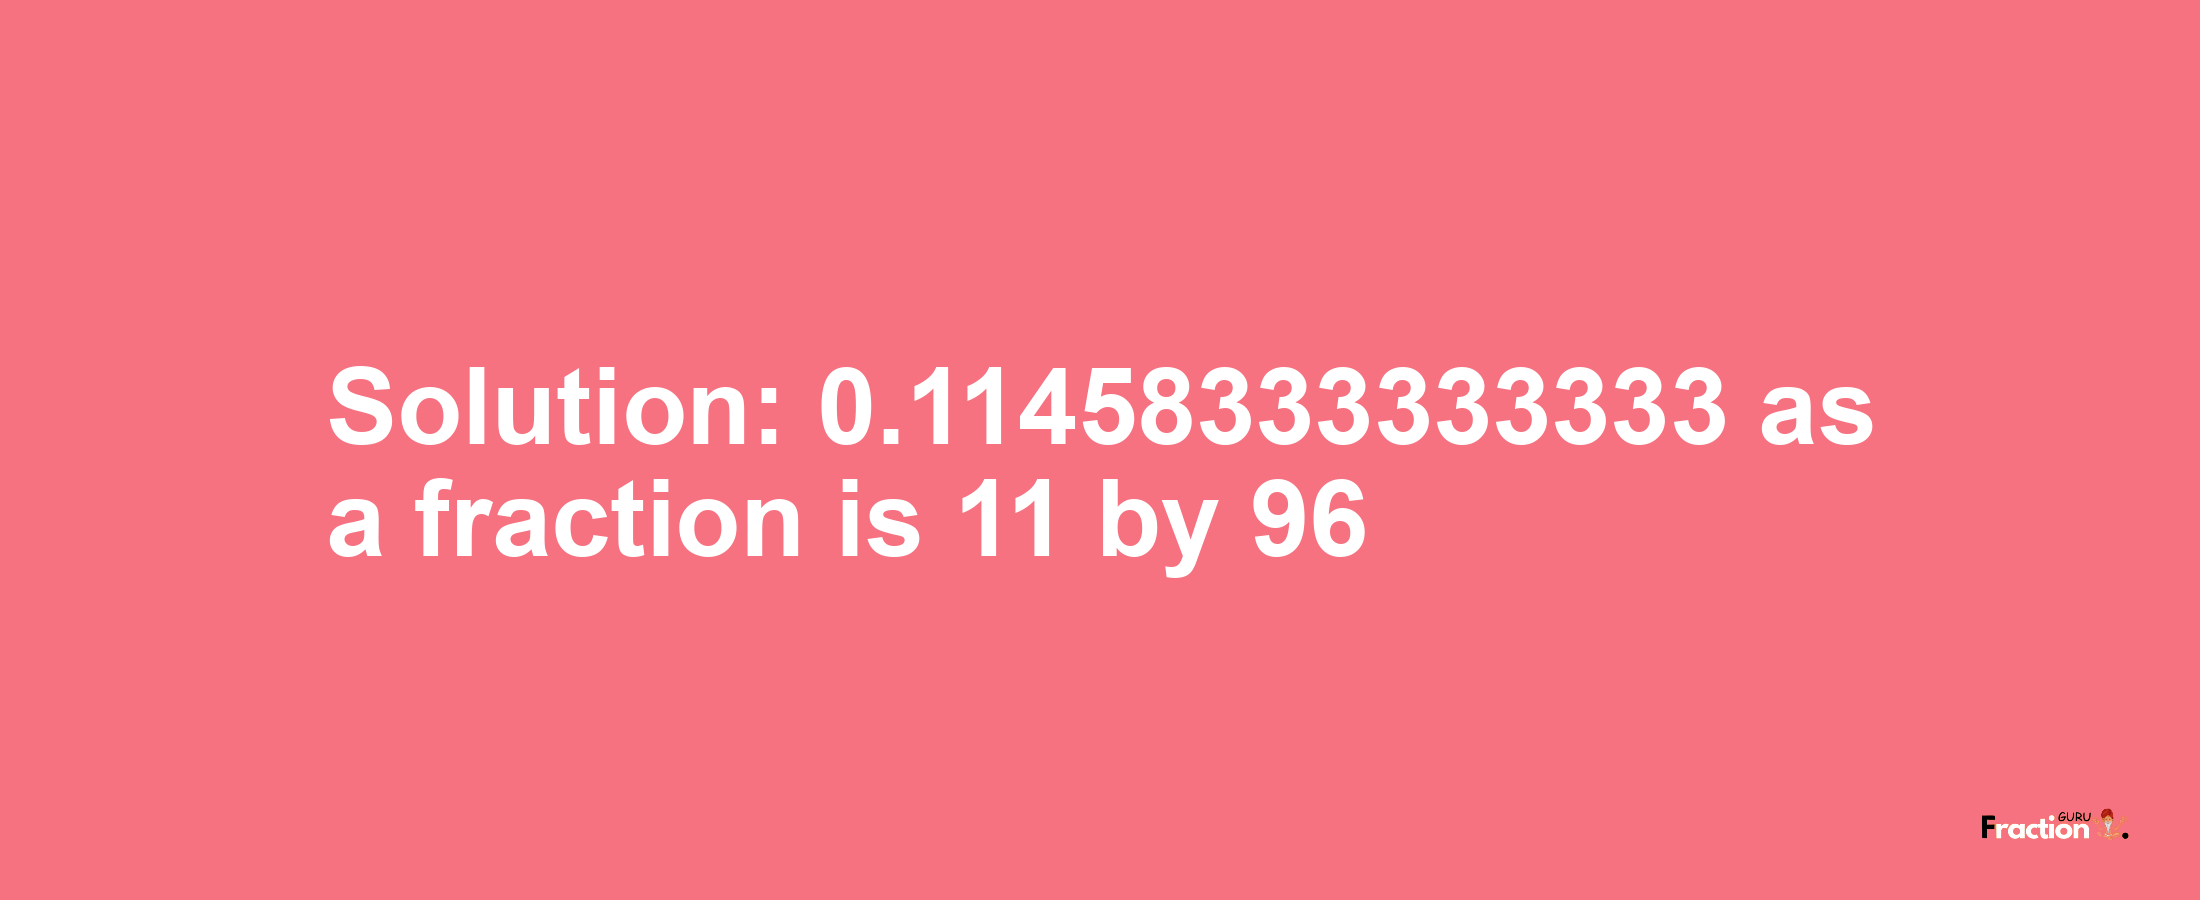 Solution:0.11458333333333 as a fraction is 11/96